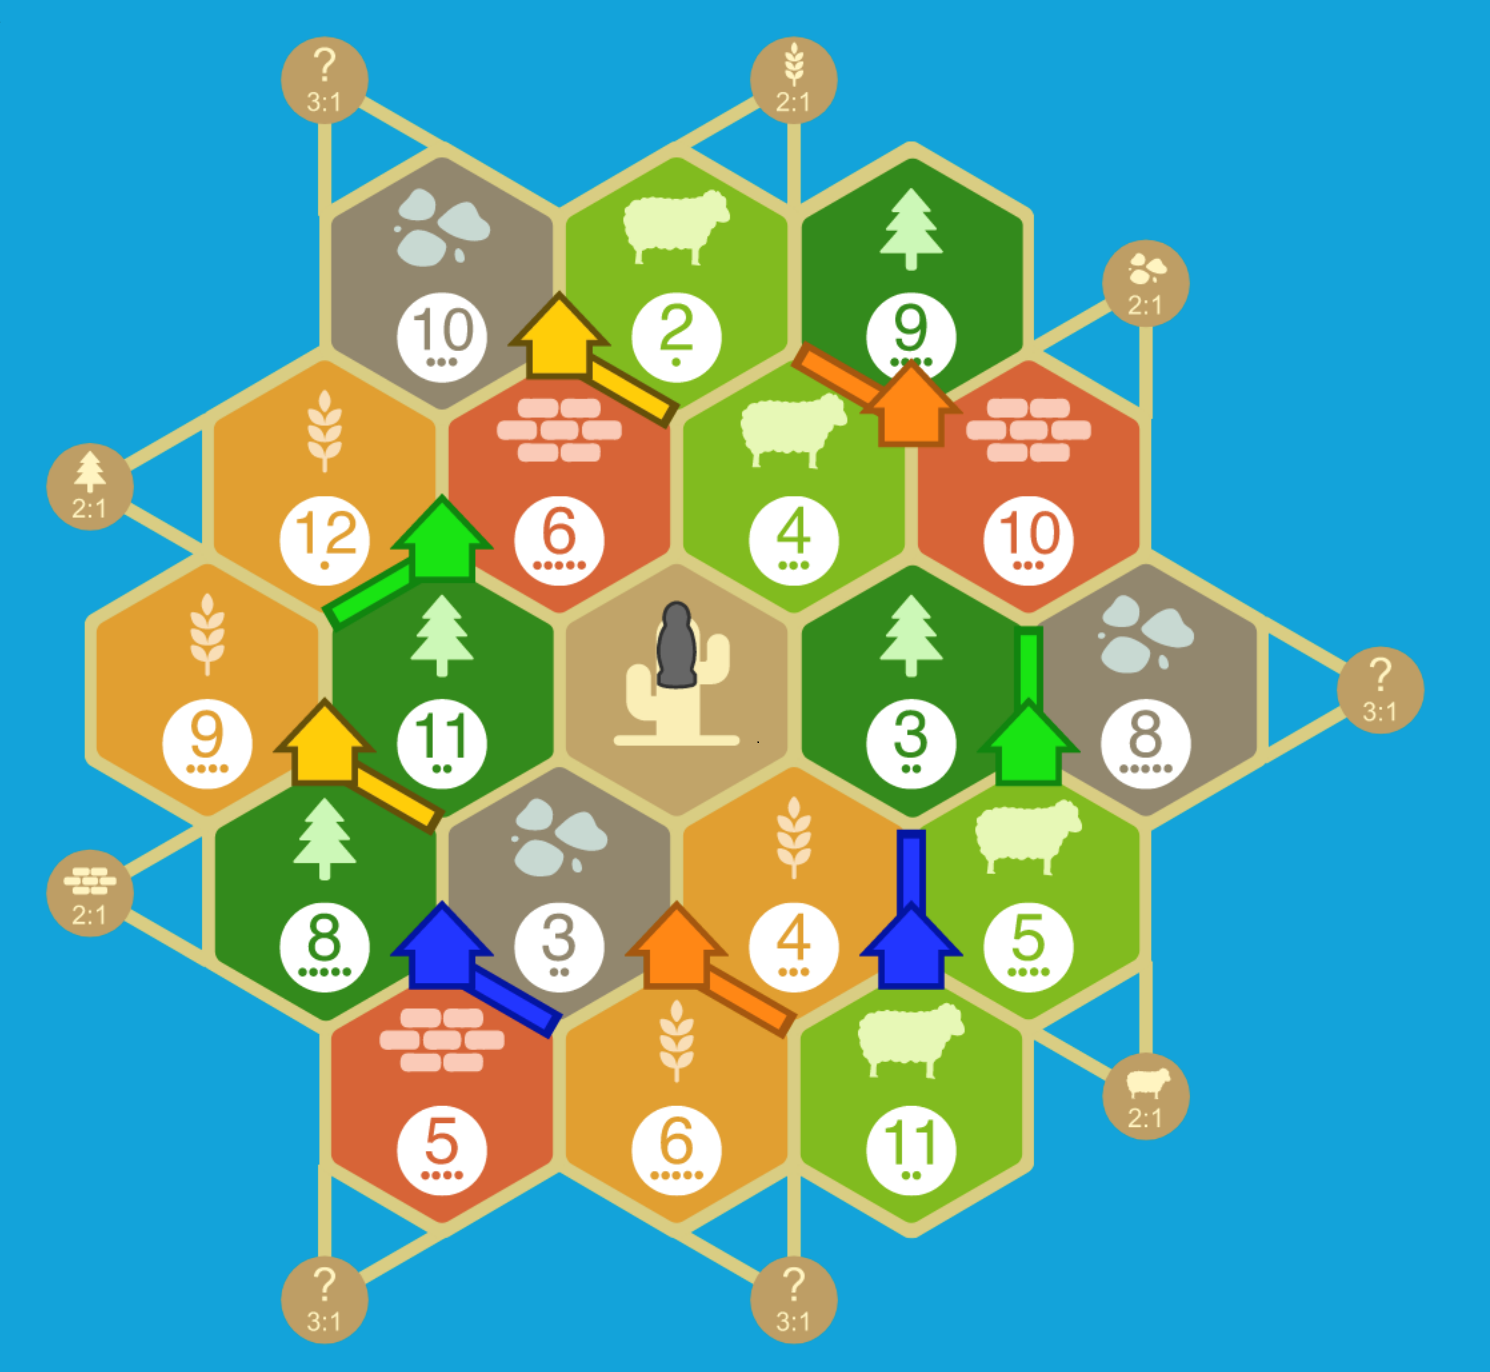 Colonist Strategies: Introduction to Settlers of Catan